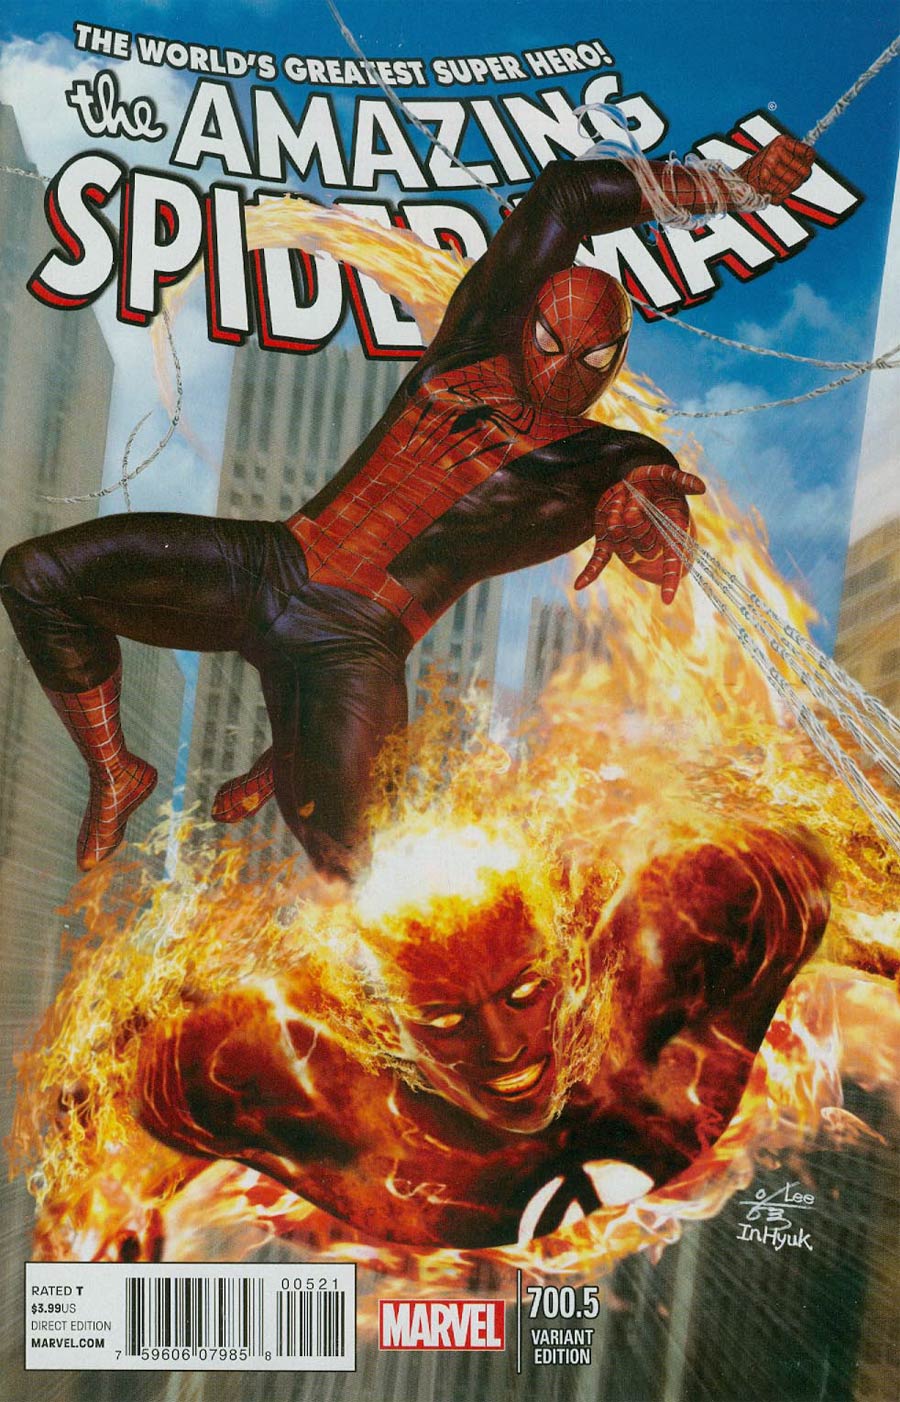 Amazing Spider-Man Vol 2 #700.5 Cover B Variant In-Hyuk Lee Cover